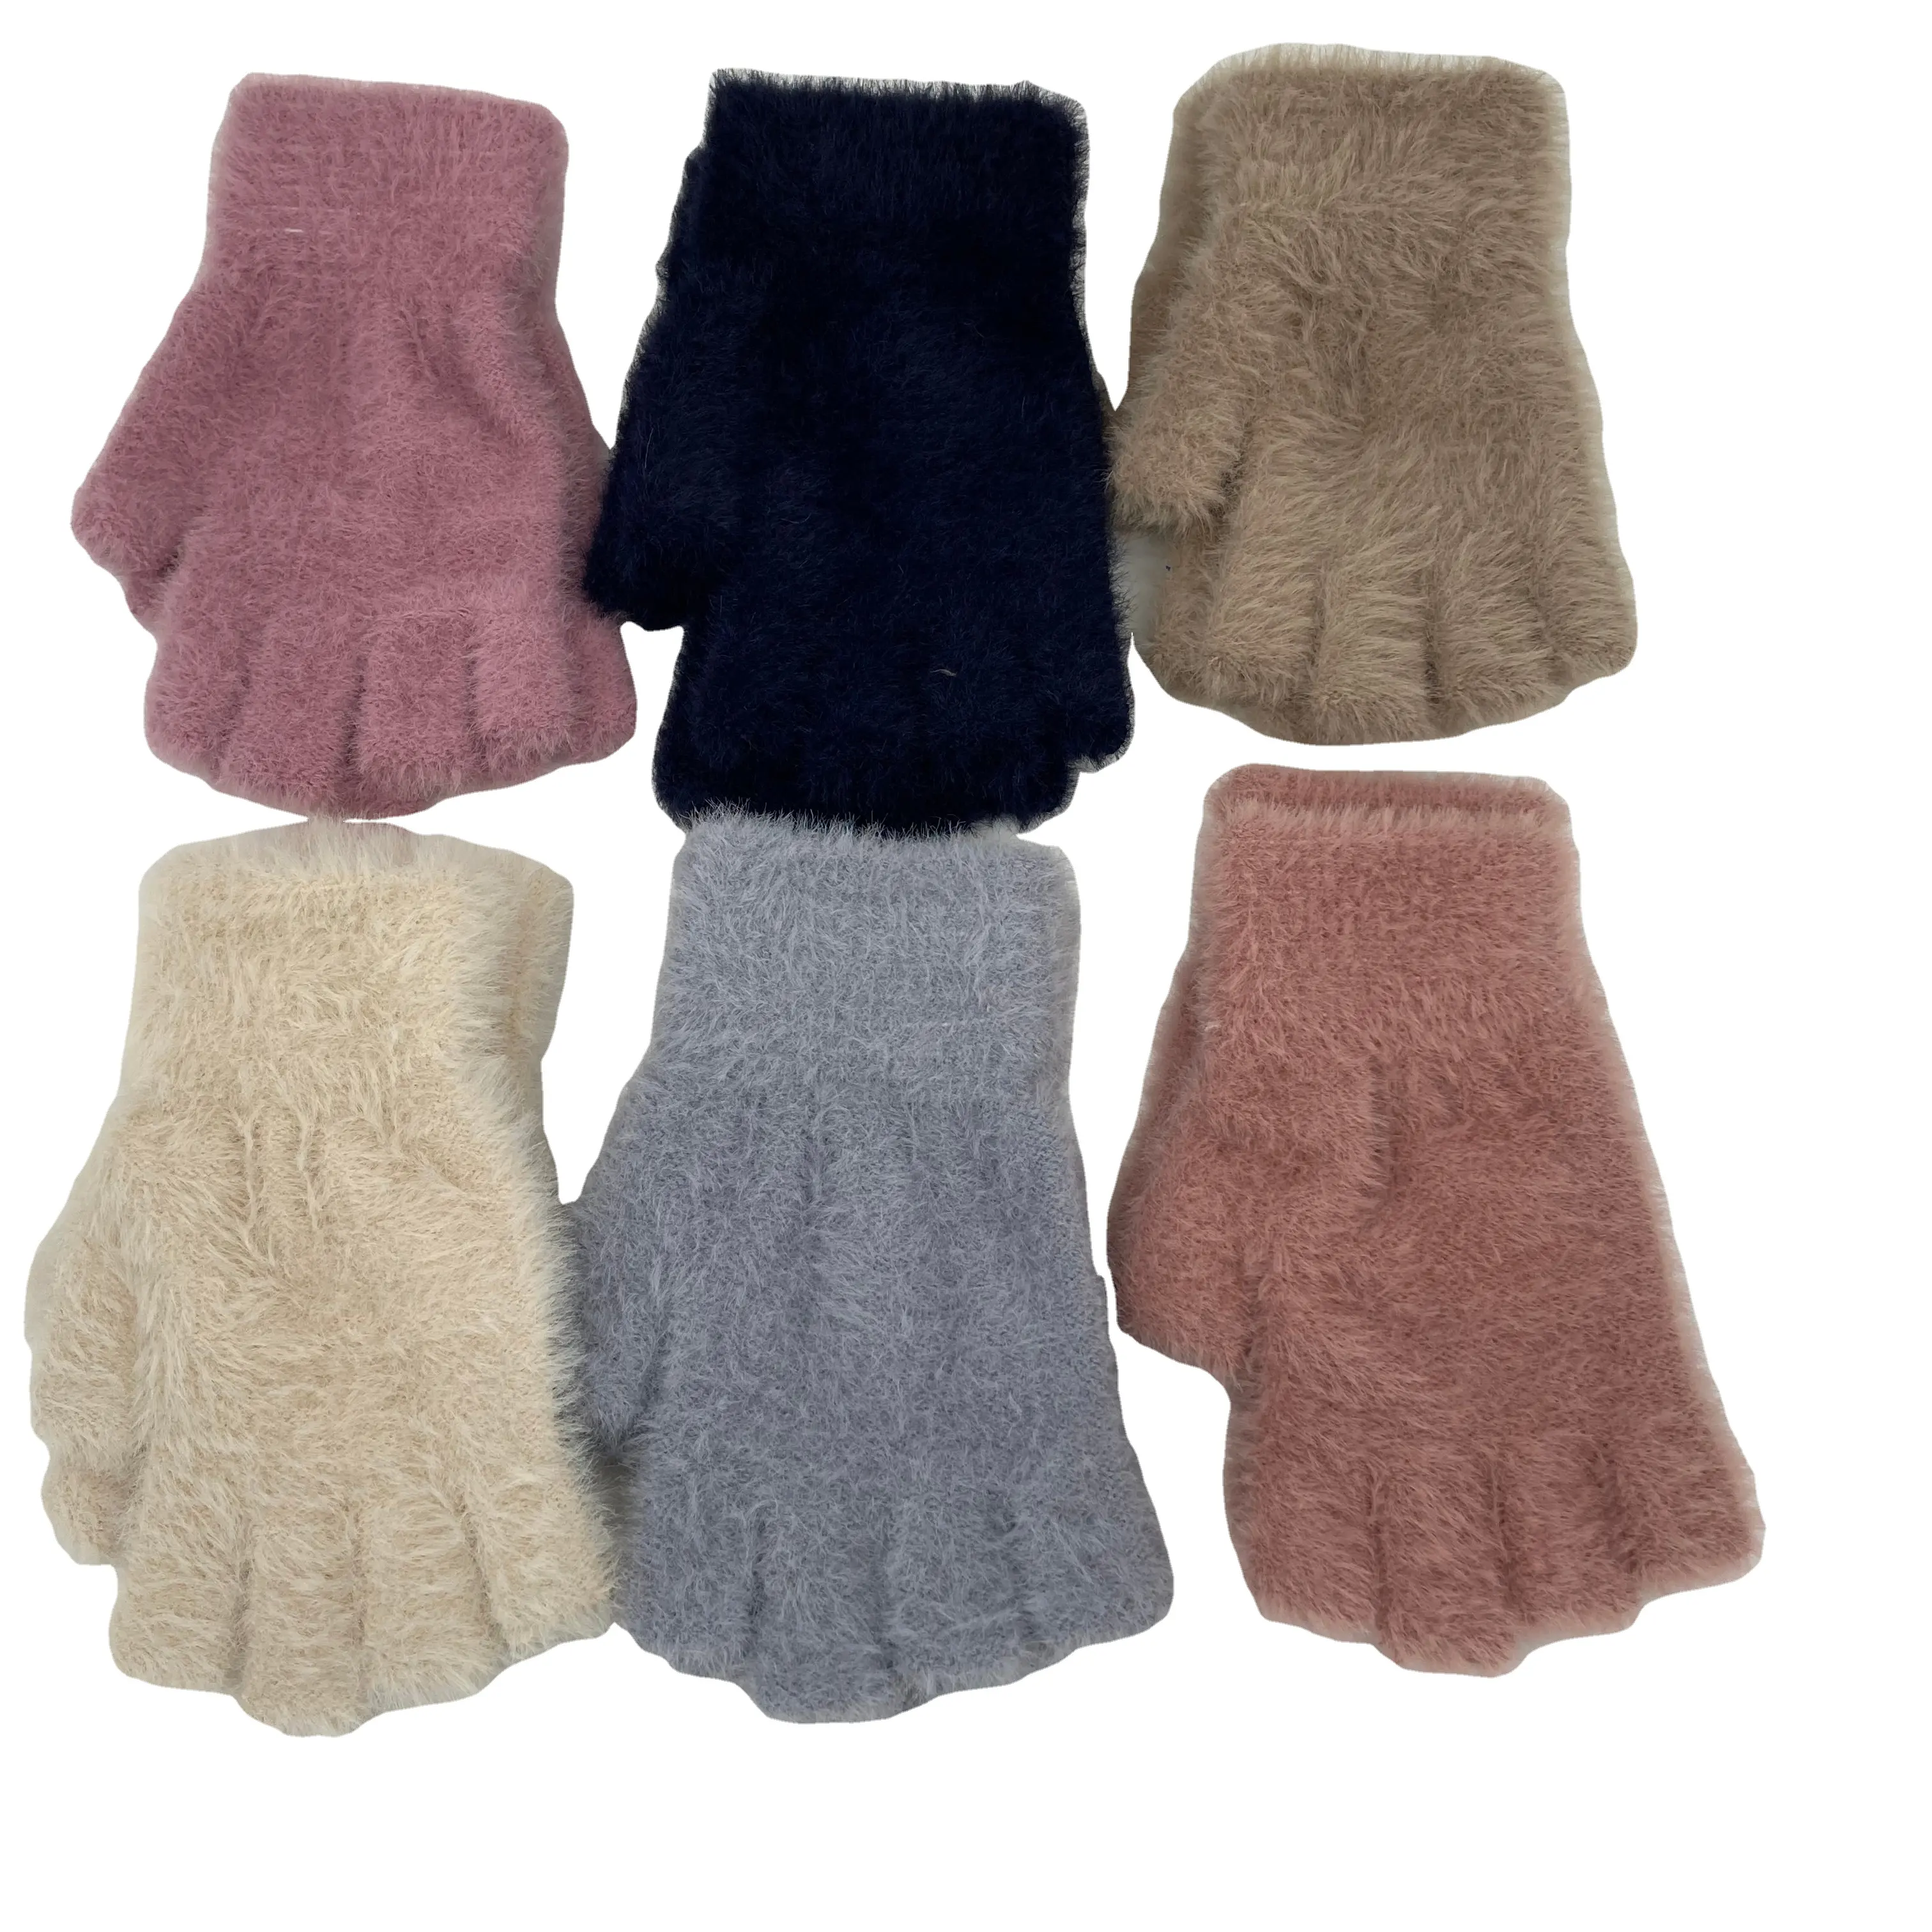 Knitted Gloves Cold Outdoor Touch Screen Winter Gloves Unisex Acrylic Women Keeping